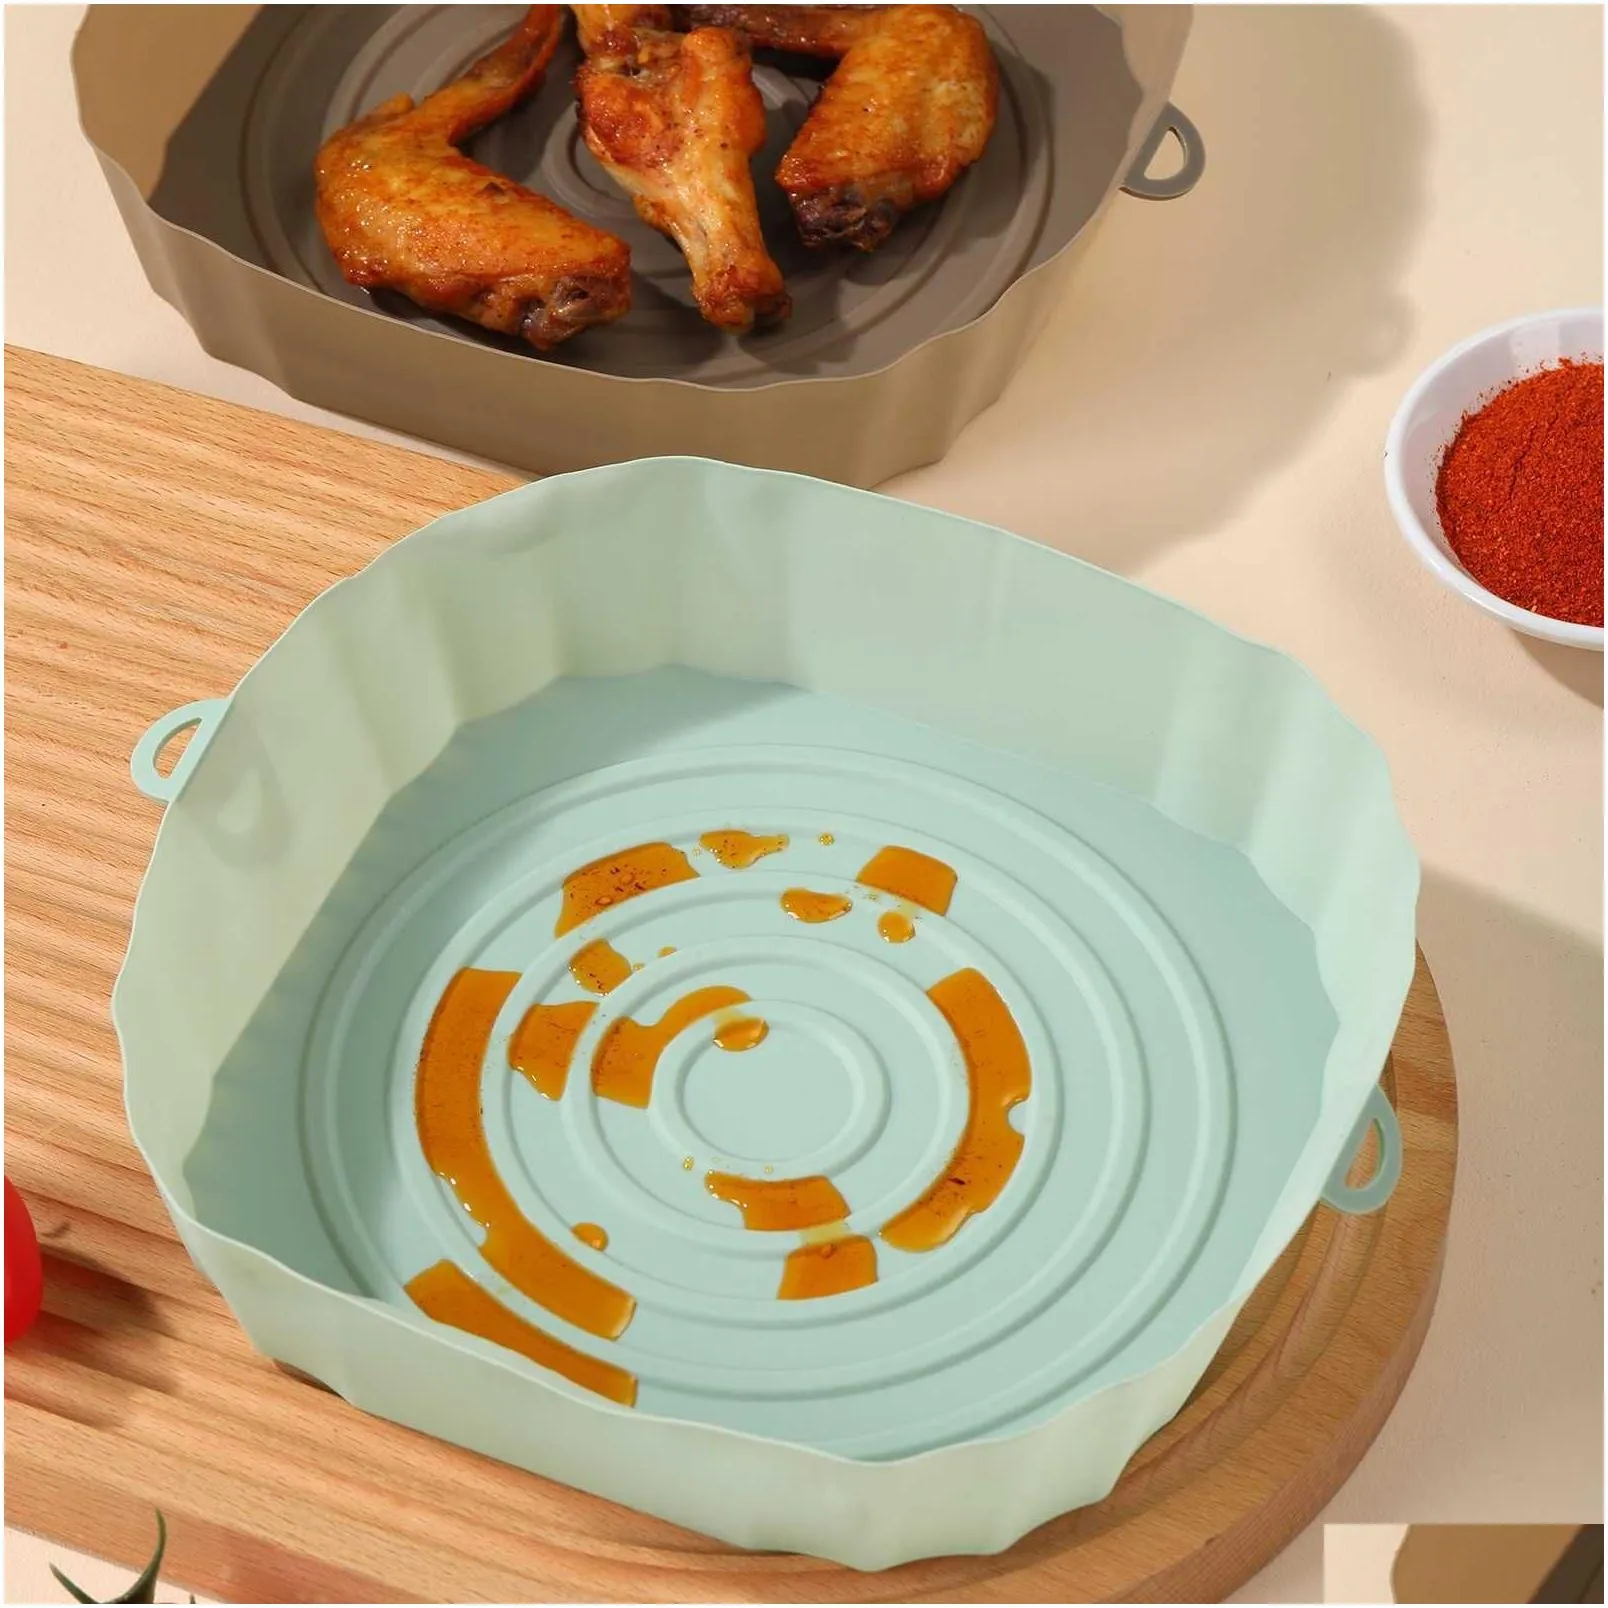  4pcs silicone air fryer basket airfryer oven mold baking tray pizza fried chicken basket reusable pan liner accessories